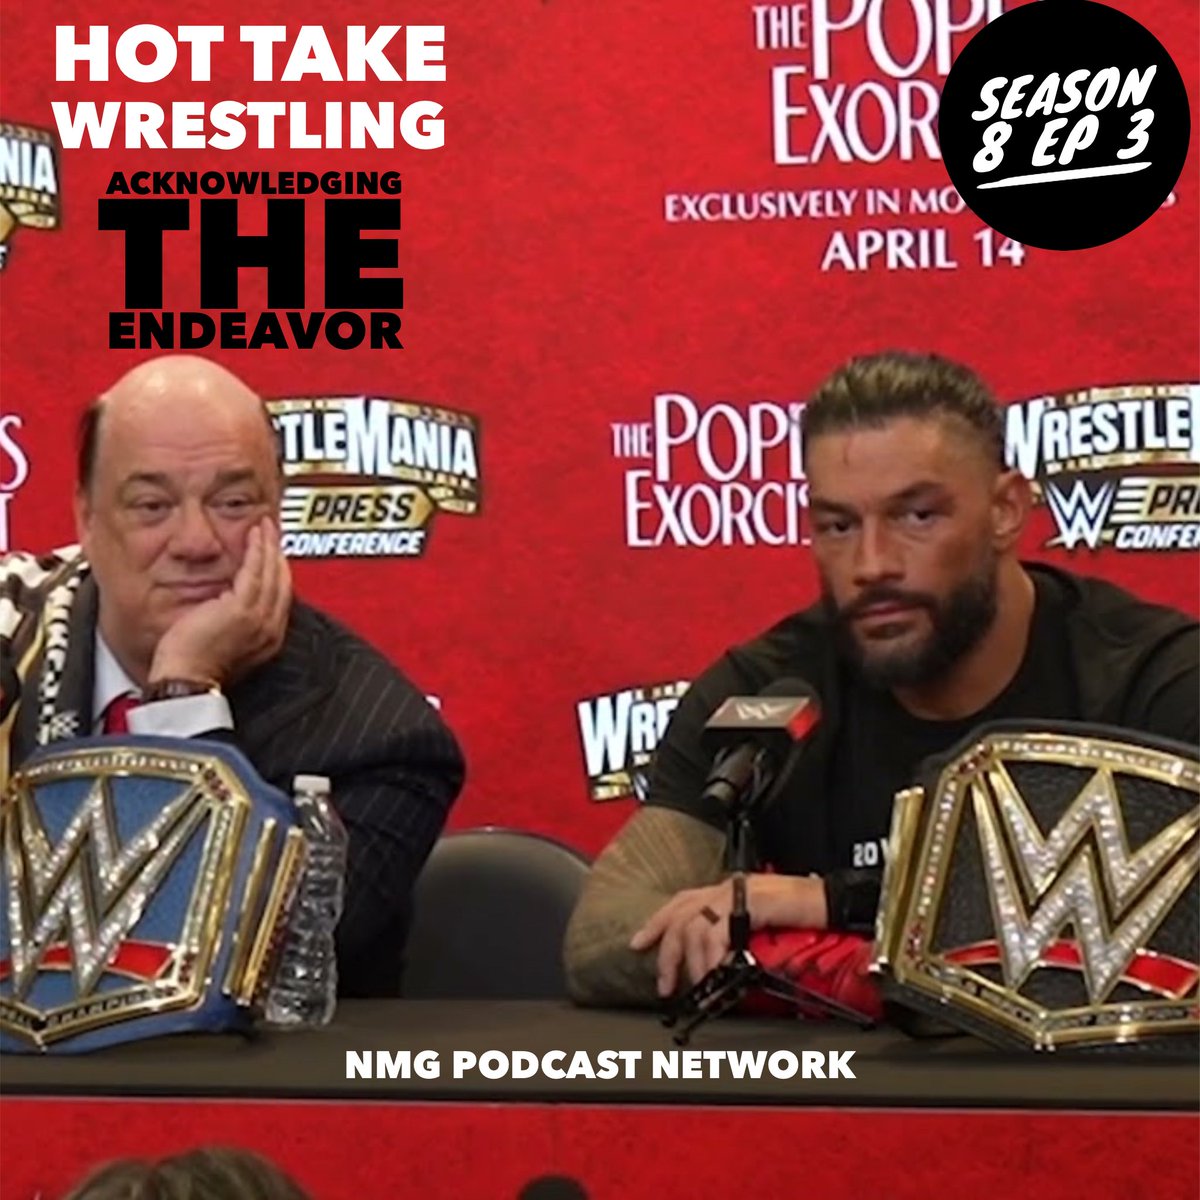 Have you watched? Audio coming! “Vince McMahon + Ego = Catastrophe” youtu.be/fQQbEJhDRdU via #hottakewrestlingpodcast #wwe #nxt #roh #impactwrestling #newpost  #aew #news #reviews #recaps #ppv #wrestlingnews #nmgpodcastnetwork #chicago #anchorfm #soundcloud #itunes #youtube